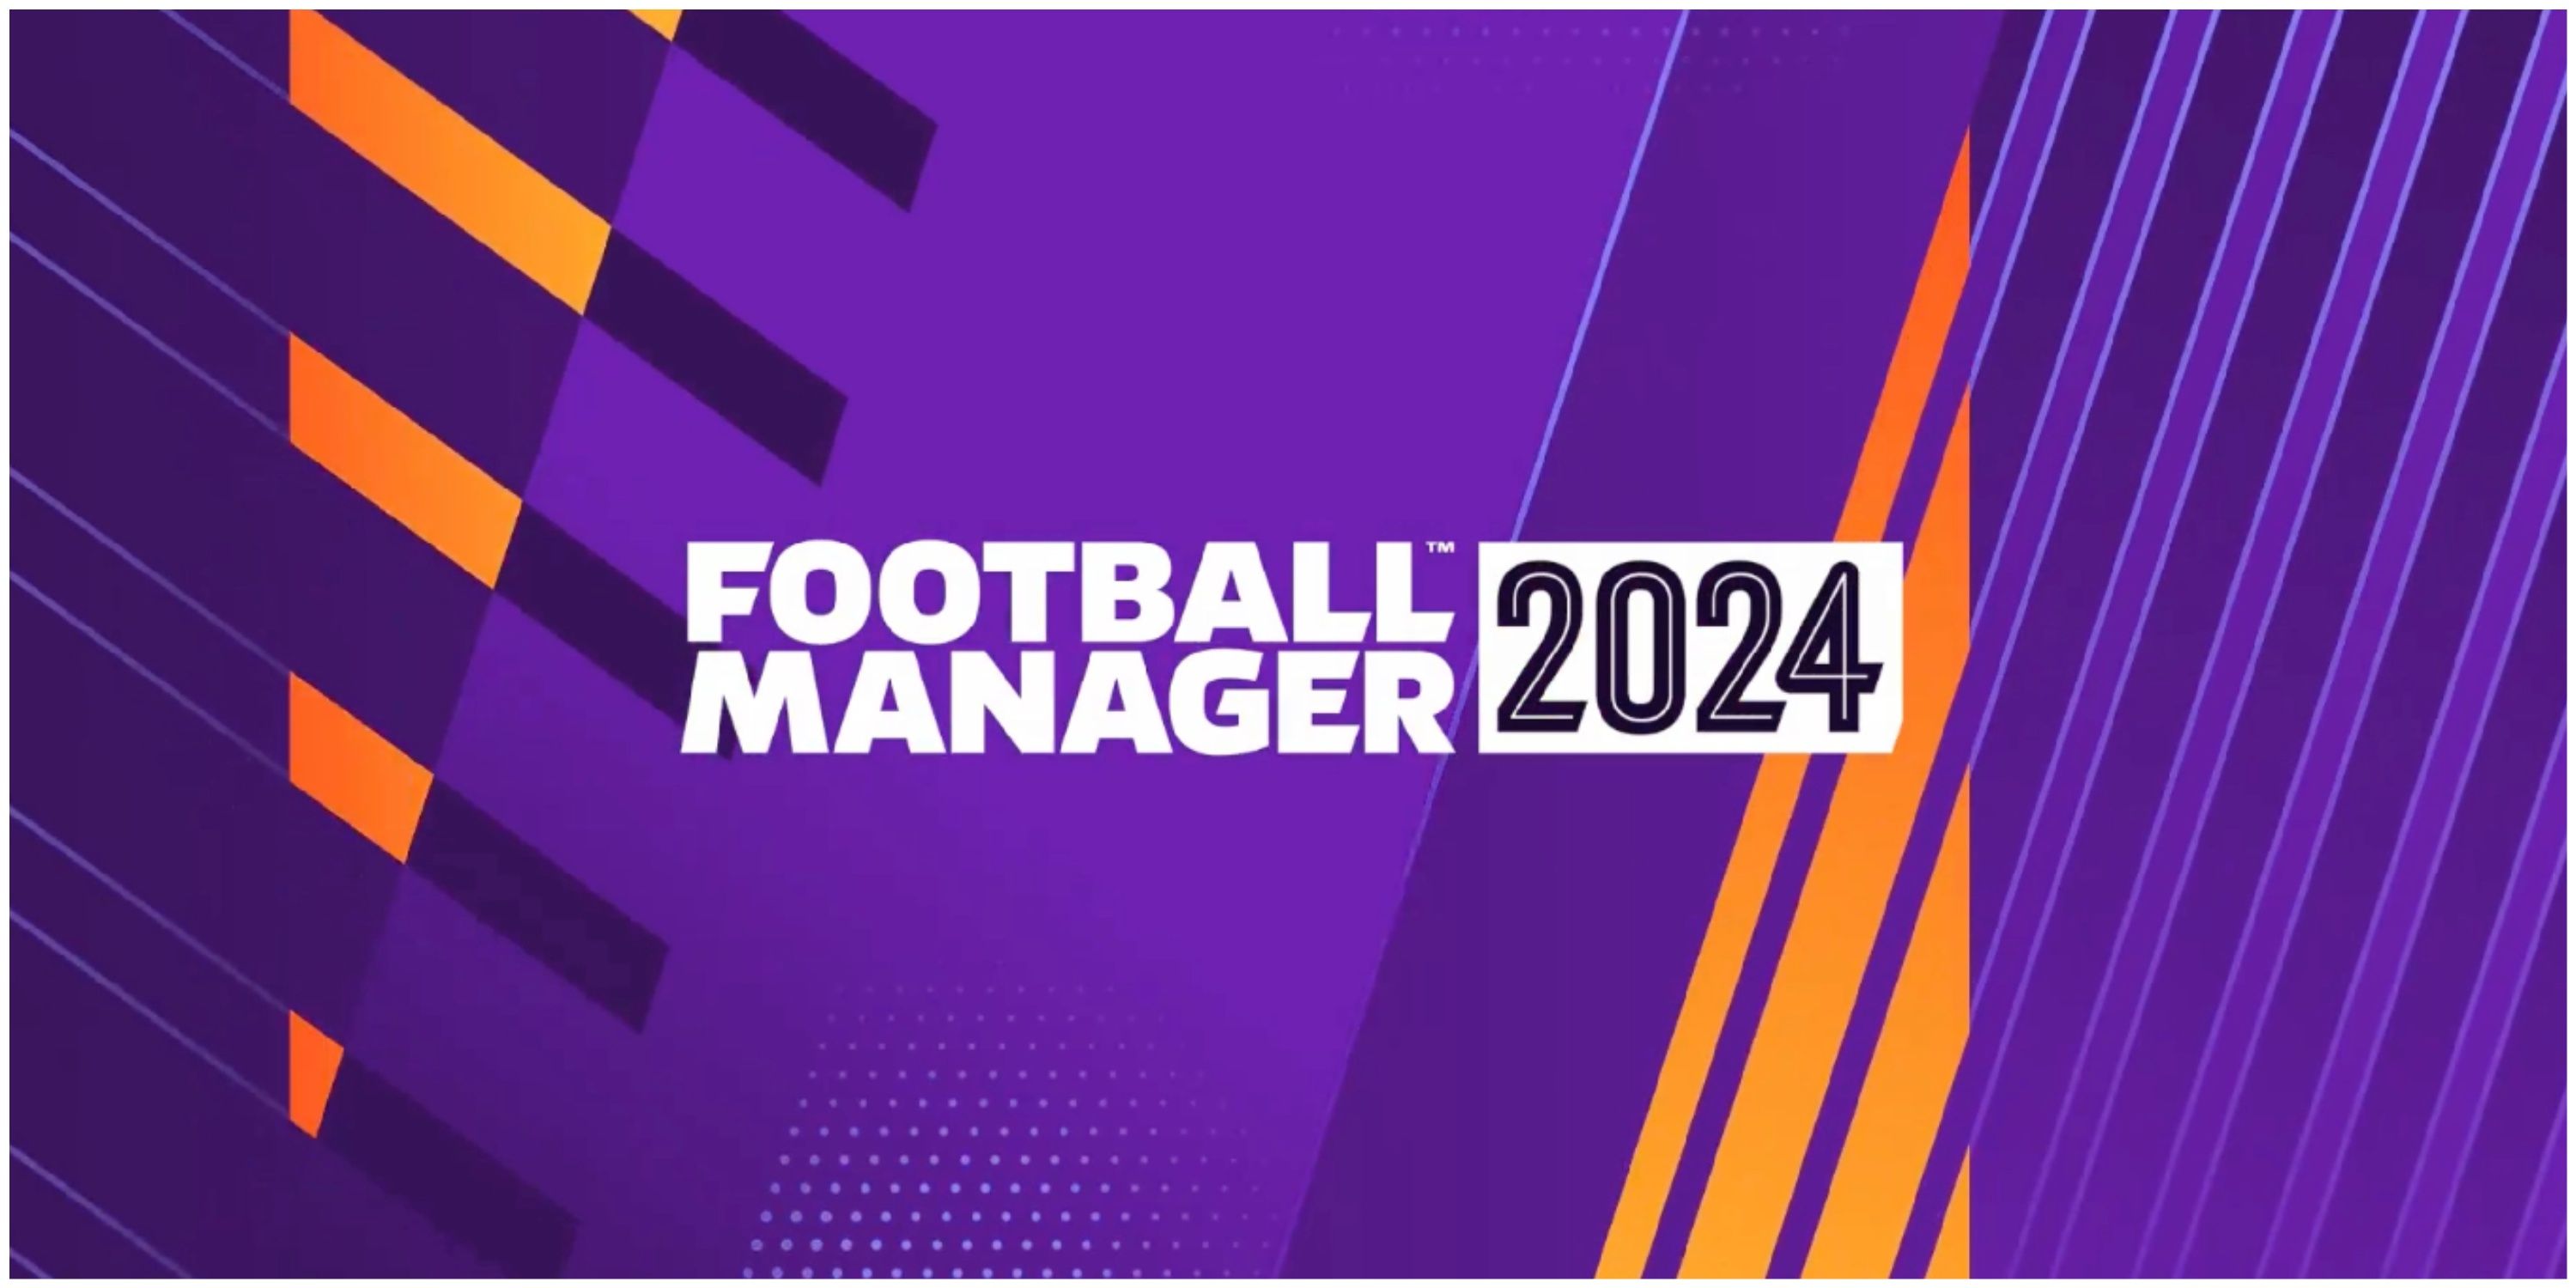 Football Manager 2024 Mobile coming exclusively to Netflix